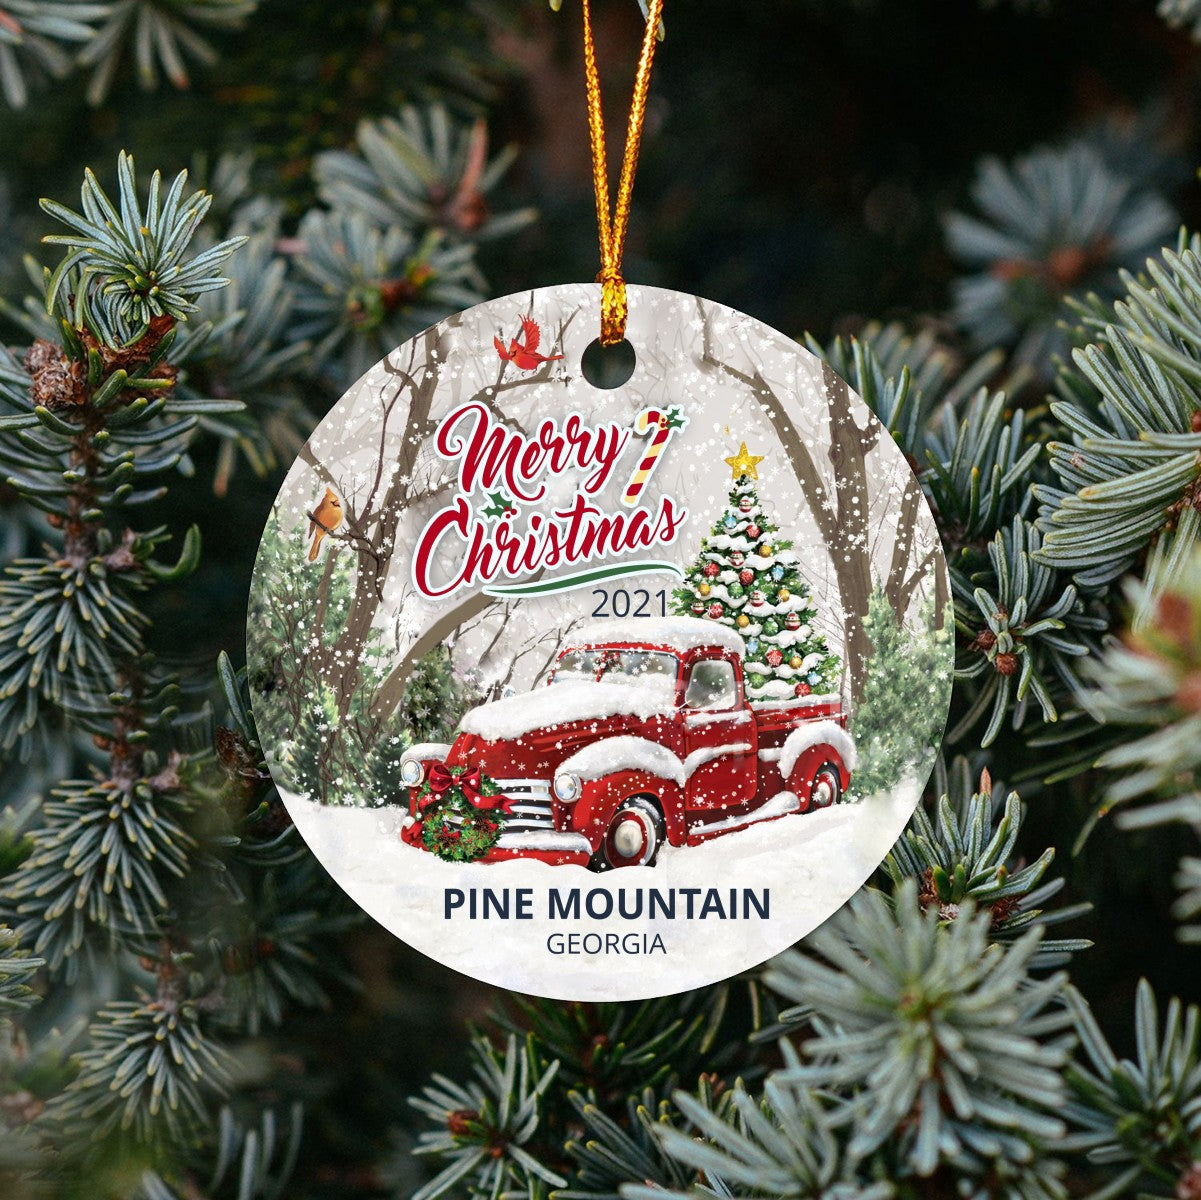 Christmas Tree Ornaments Pine Mountain - Ornament With Name City, State Pine Mountain Georgia GA Ornament - Red Truck Xmas Ornaments 3'' Plastic Gift For Family, Friend And Housewarming